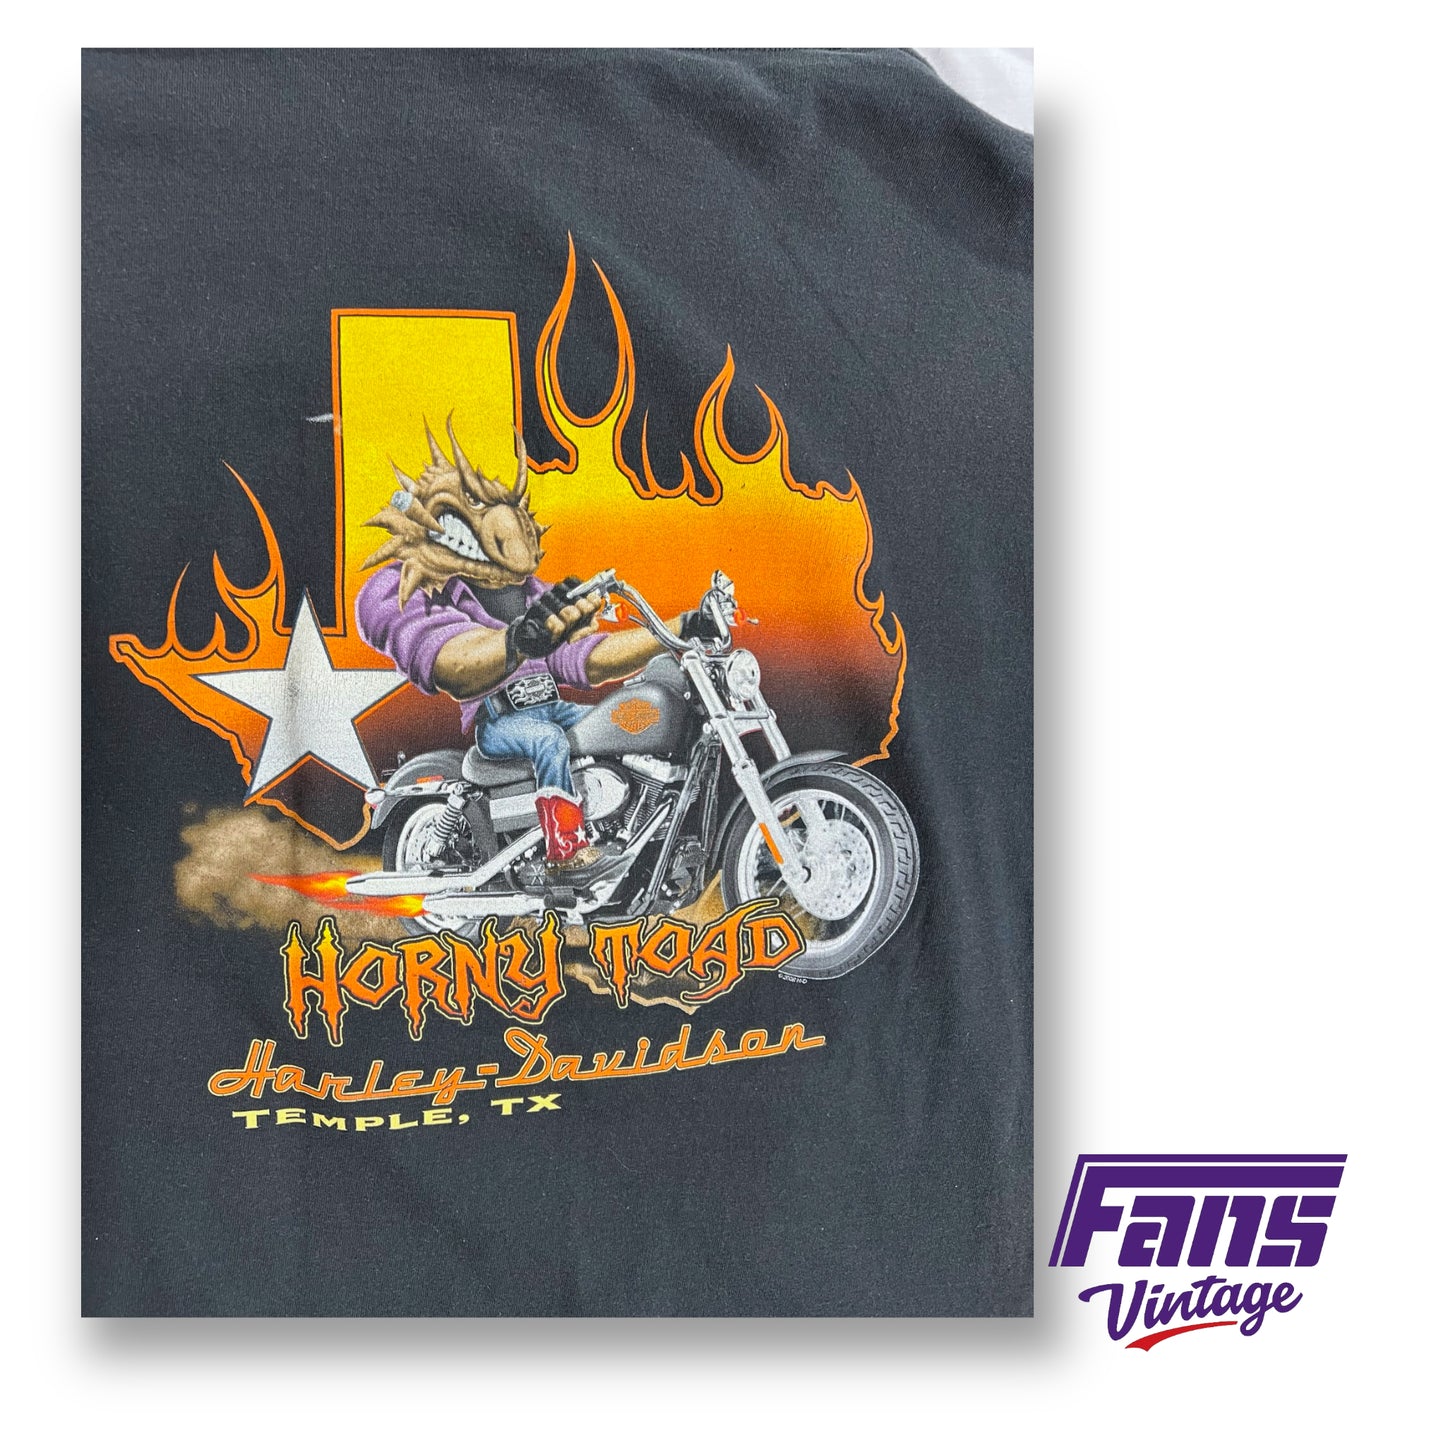 Vintage Harley Davidson 'pin up girl' Horny Toad t-shirt -double sided